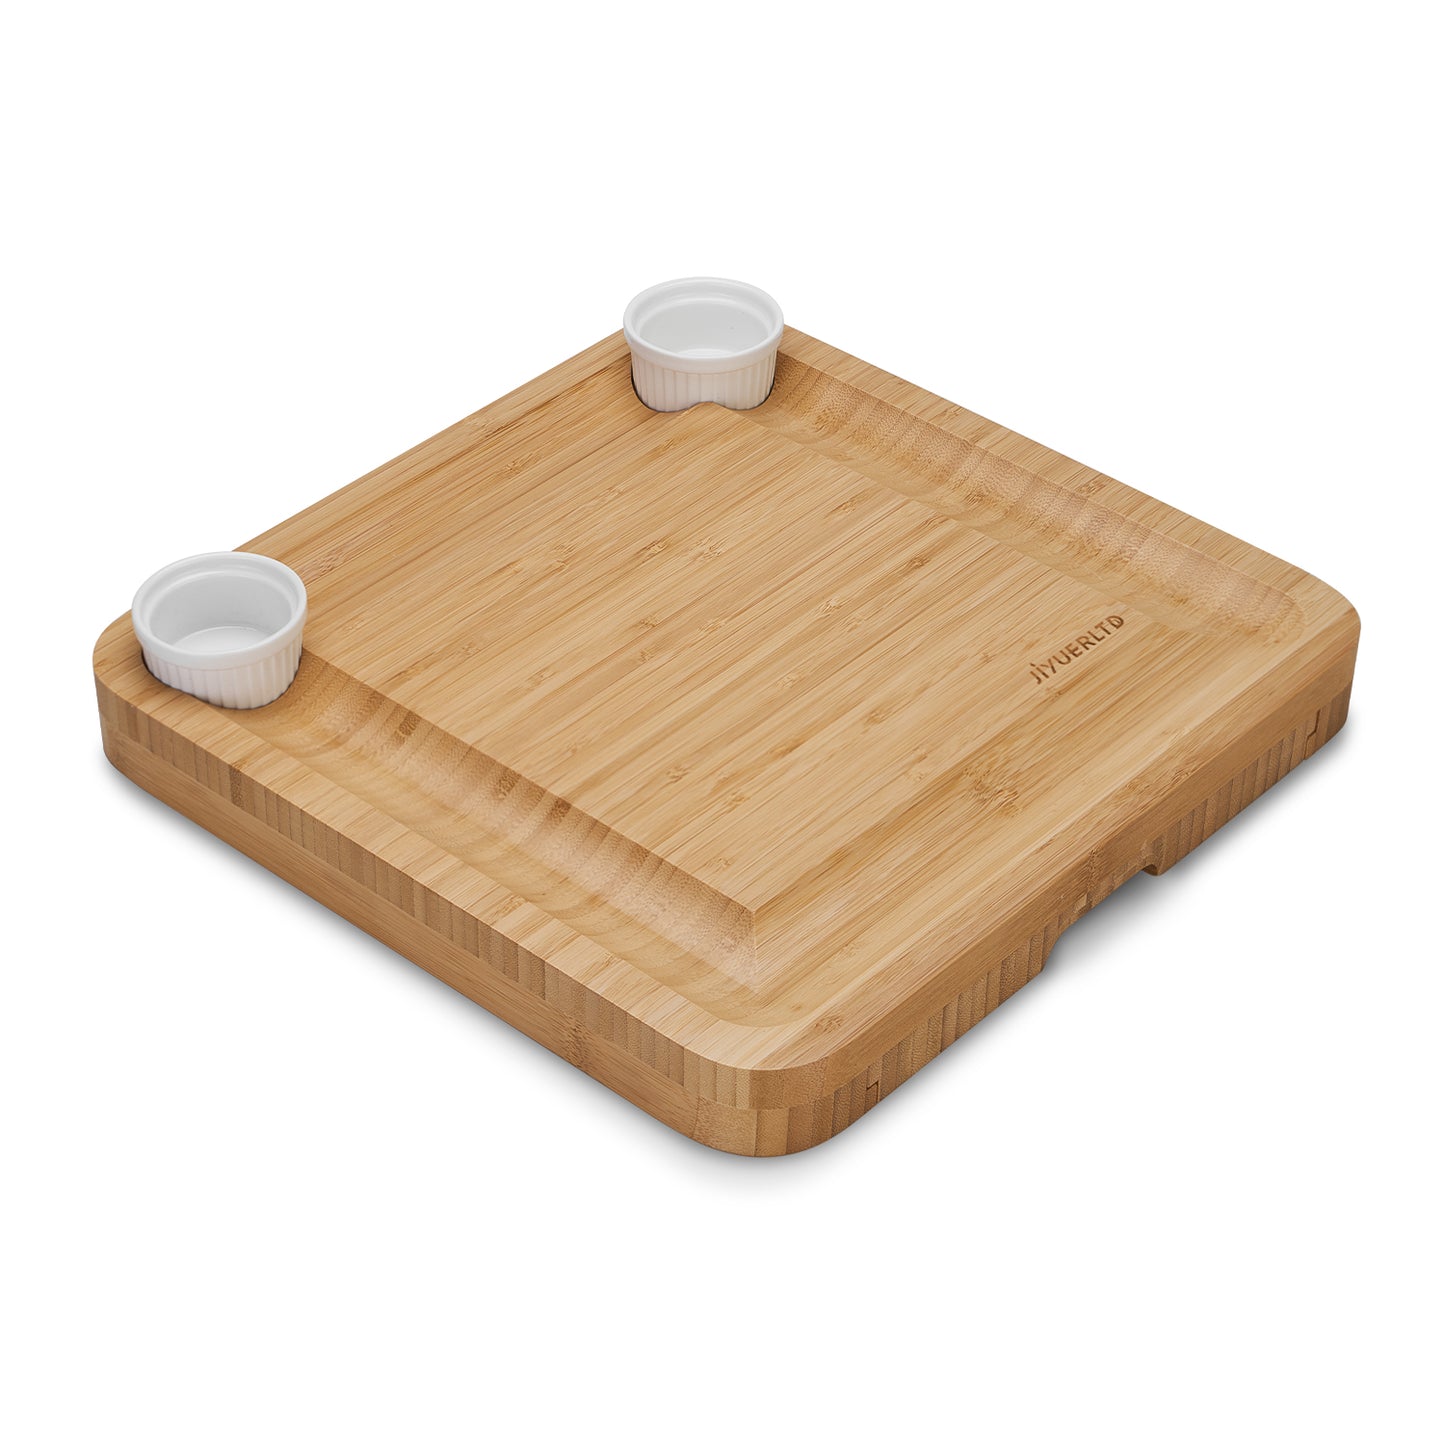 JIYUERLTD Cheese Board with Knives and Opener Bamboo Cutting Board, Cheese Services for Kitchen, Platter for Wine, Cheese, Meat.13.4x13.4x1.5 inch.